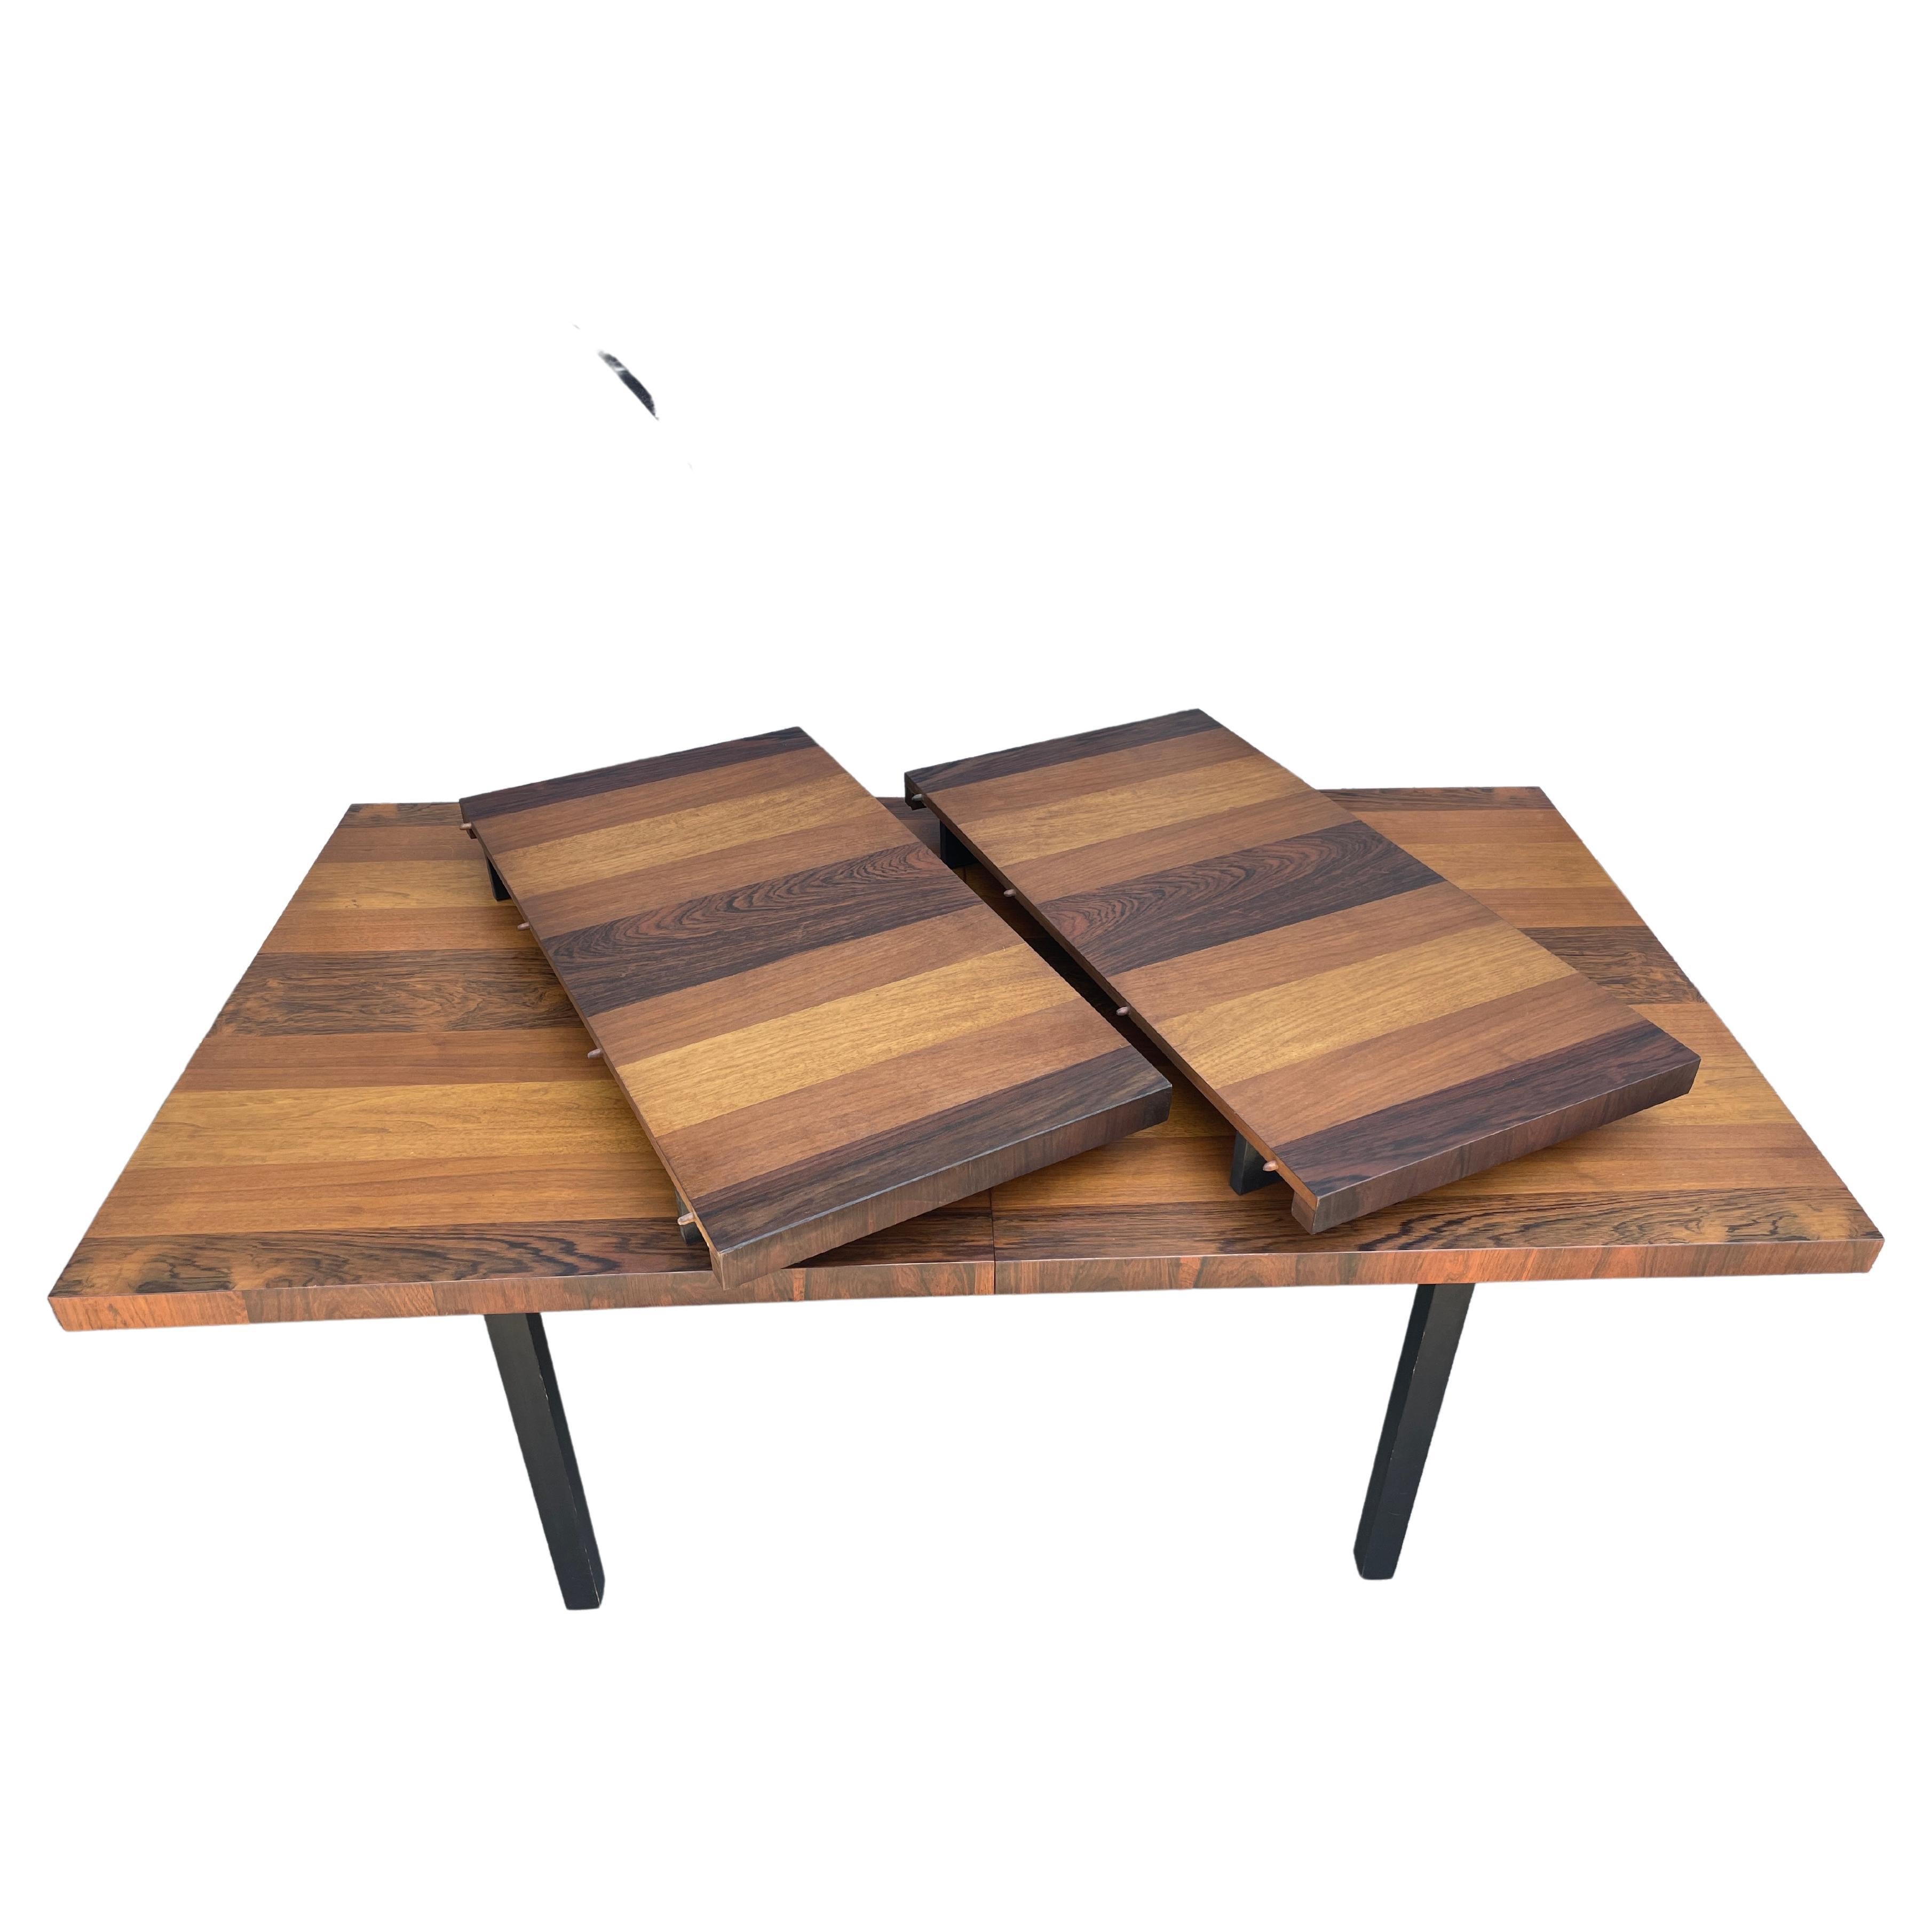 Midcentury Tri-Wood Expandable Dining Table by Milo Baughman with '2' Leaves